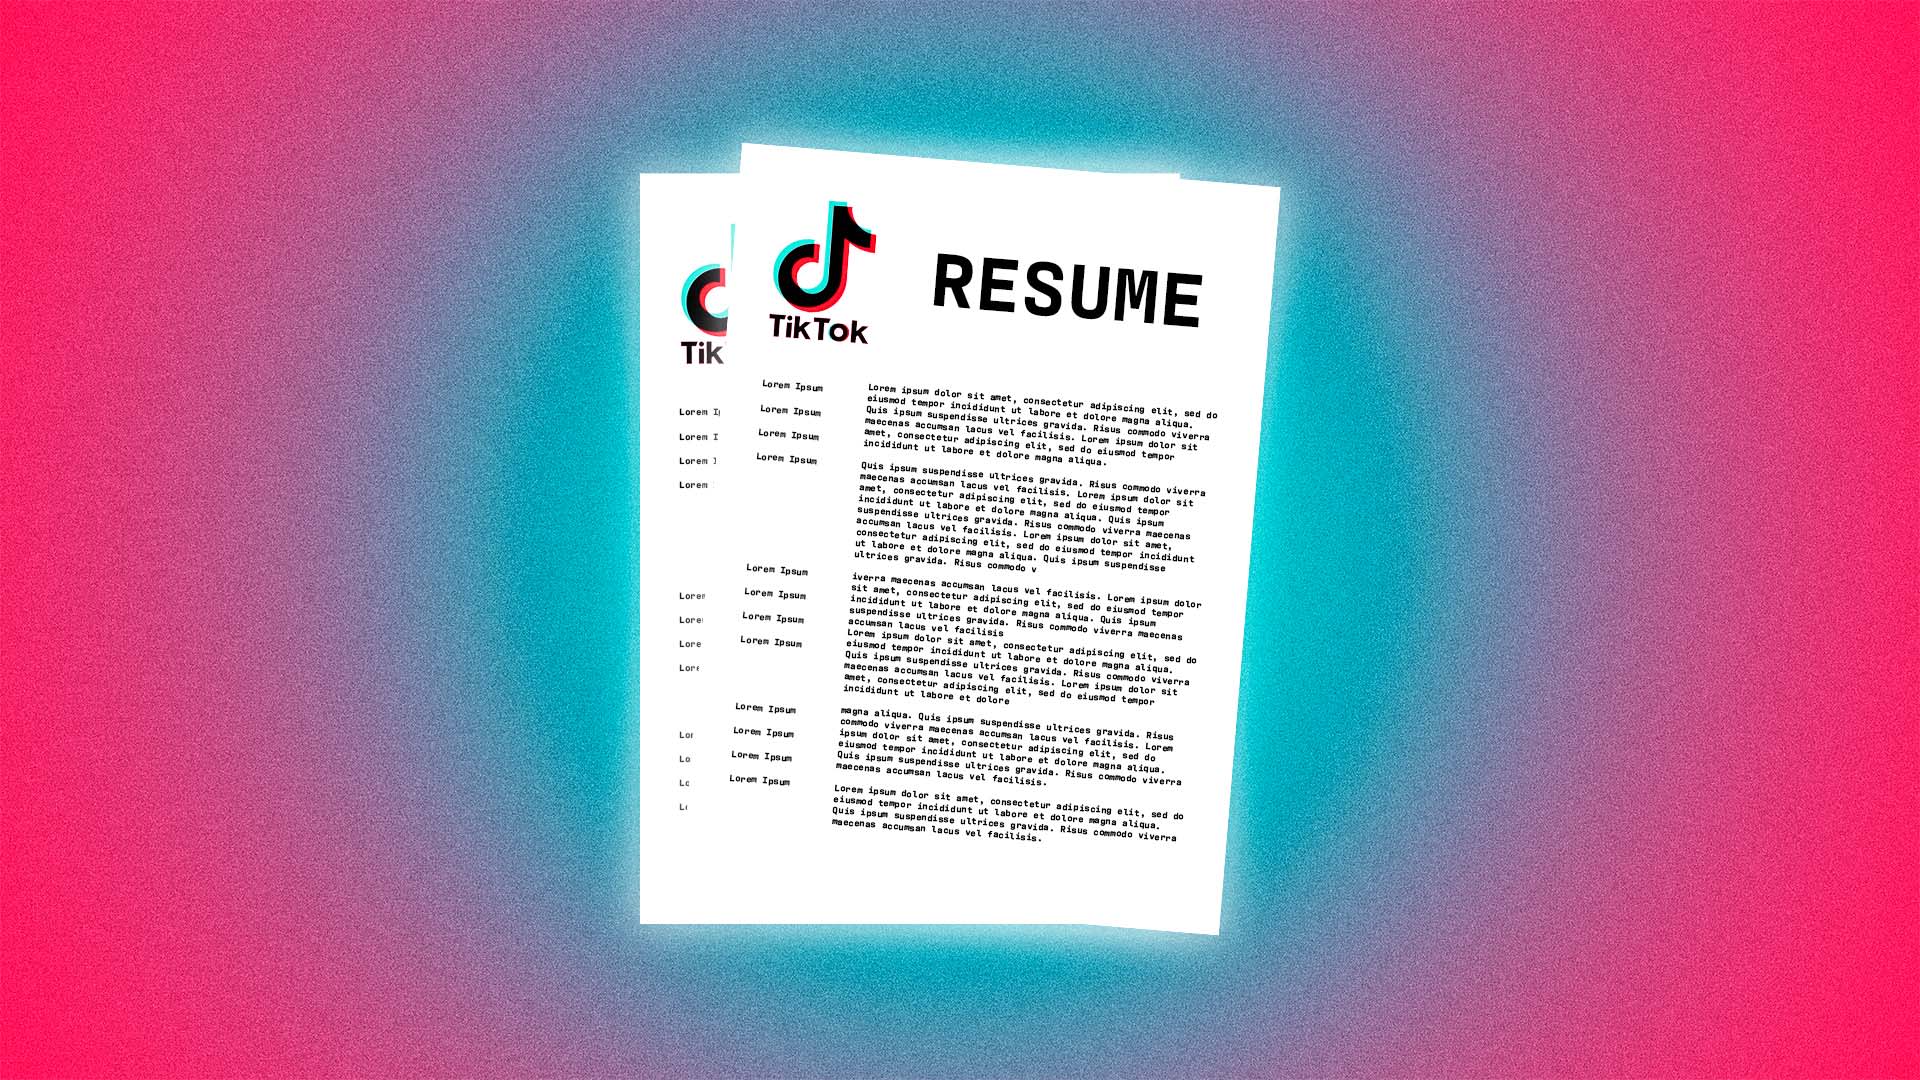 How to Leverage the TikTok Resume for Your Company